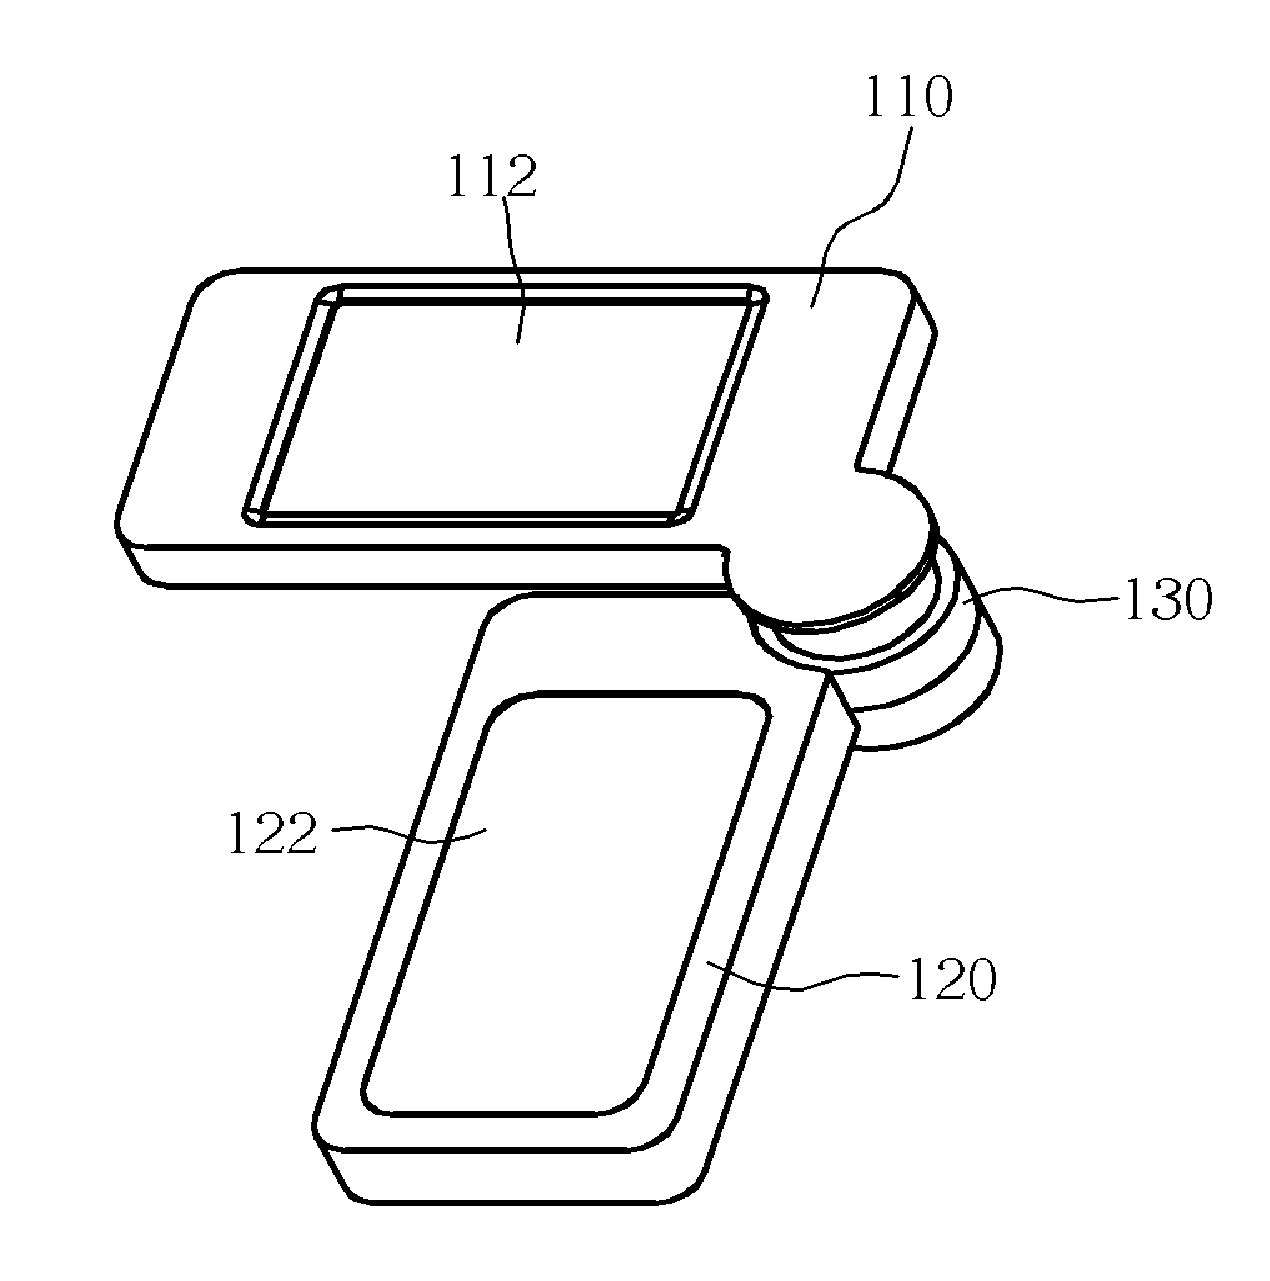 Electronic device having a rotating housing